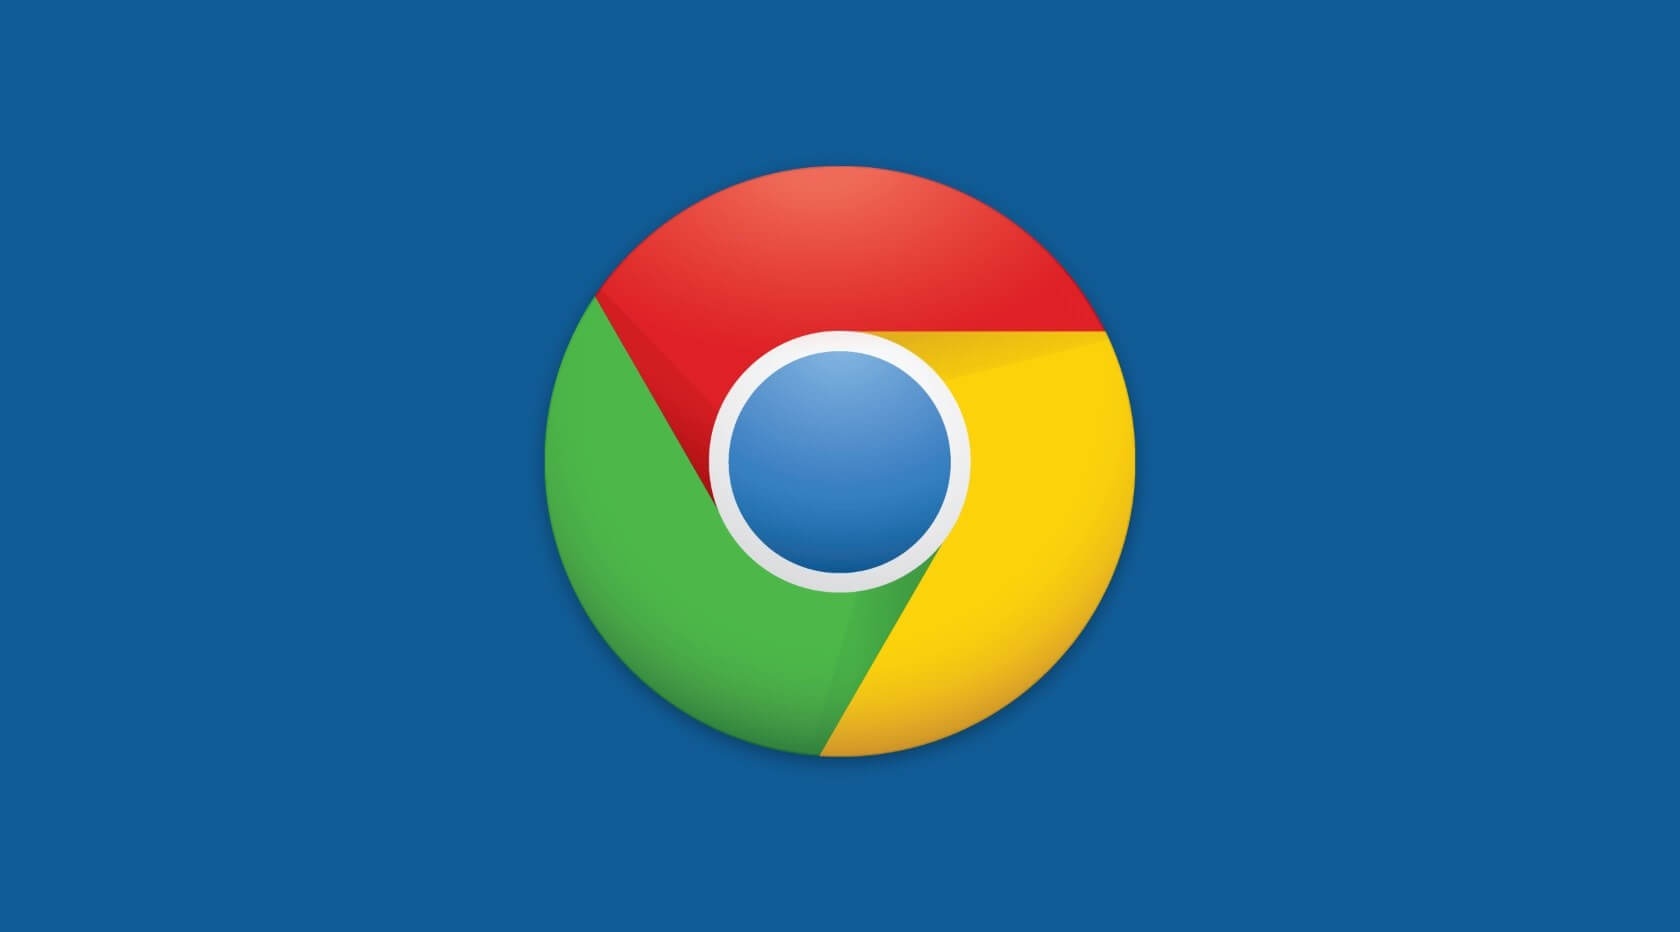 Chrome 74 arrives with Dark Mode support for Windows